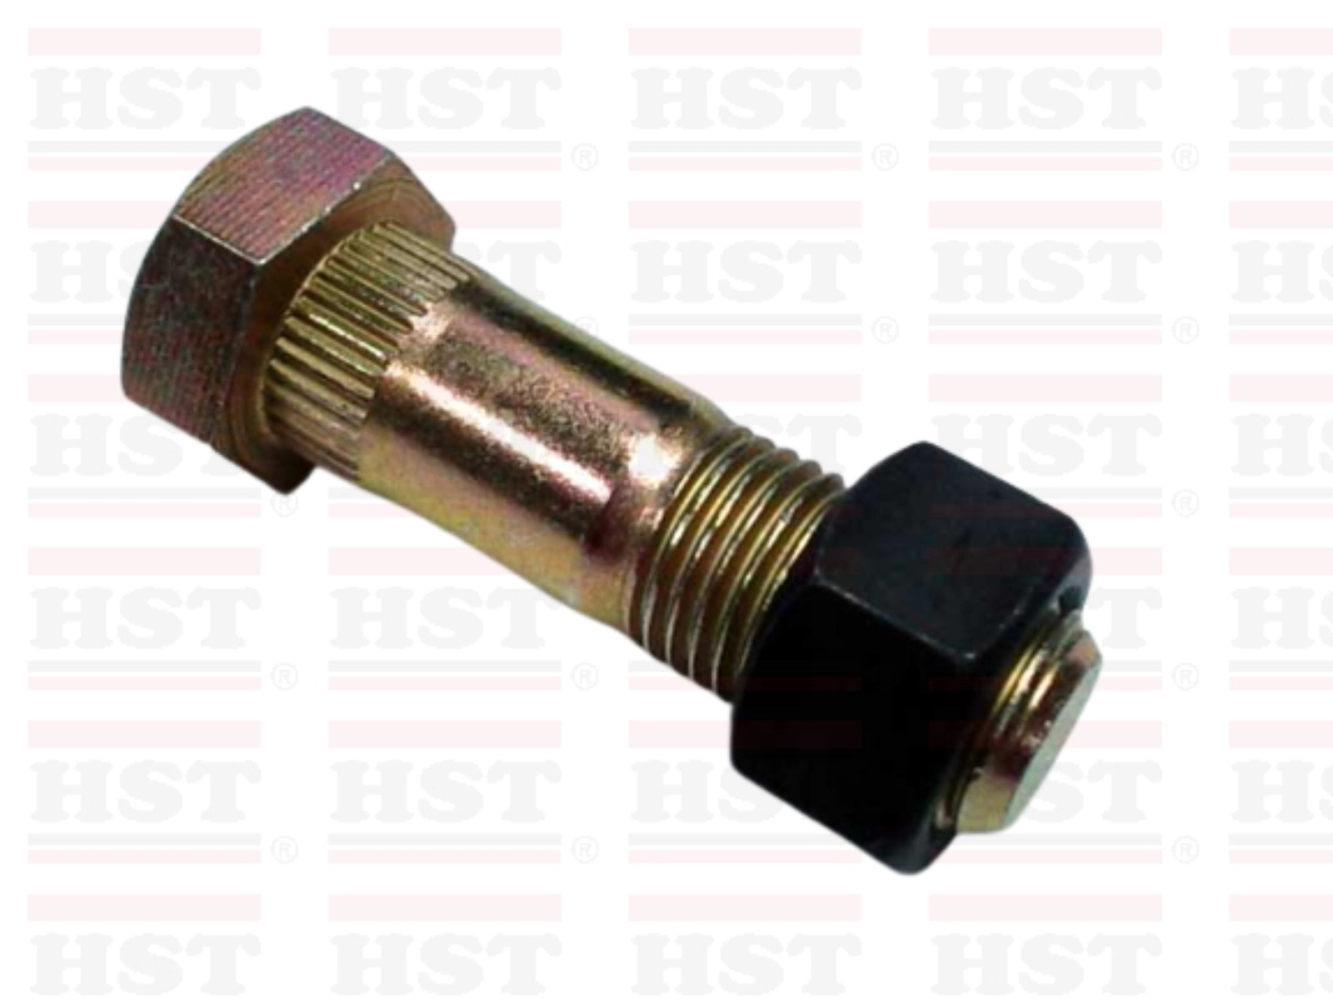 MITSUBISHI CANTER FE639 HAND BRAKE BOLT WITH NUT WITH THREAD (HBB-FE639-10)